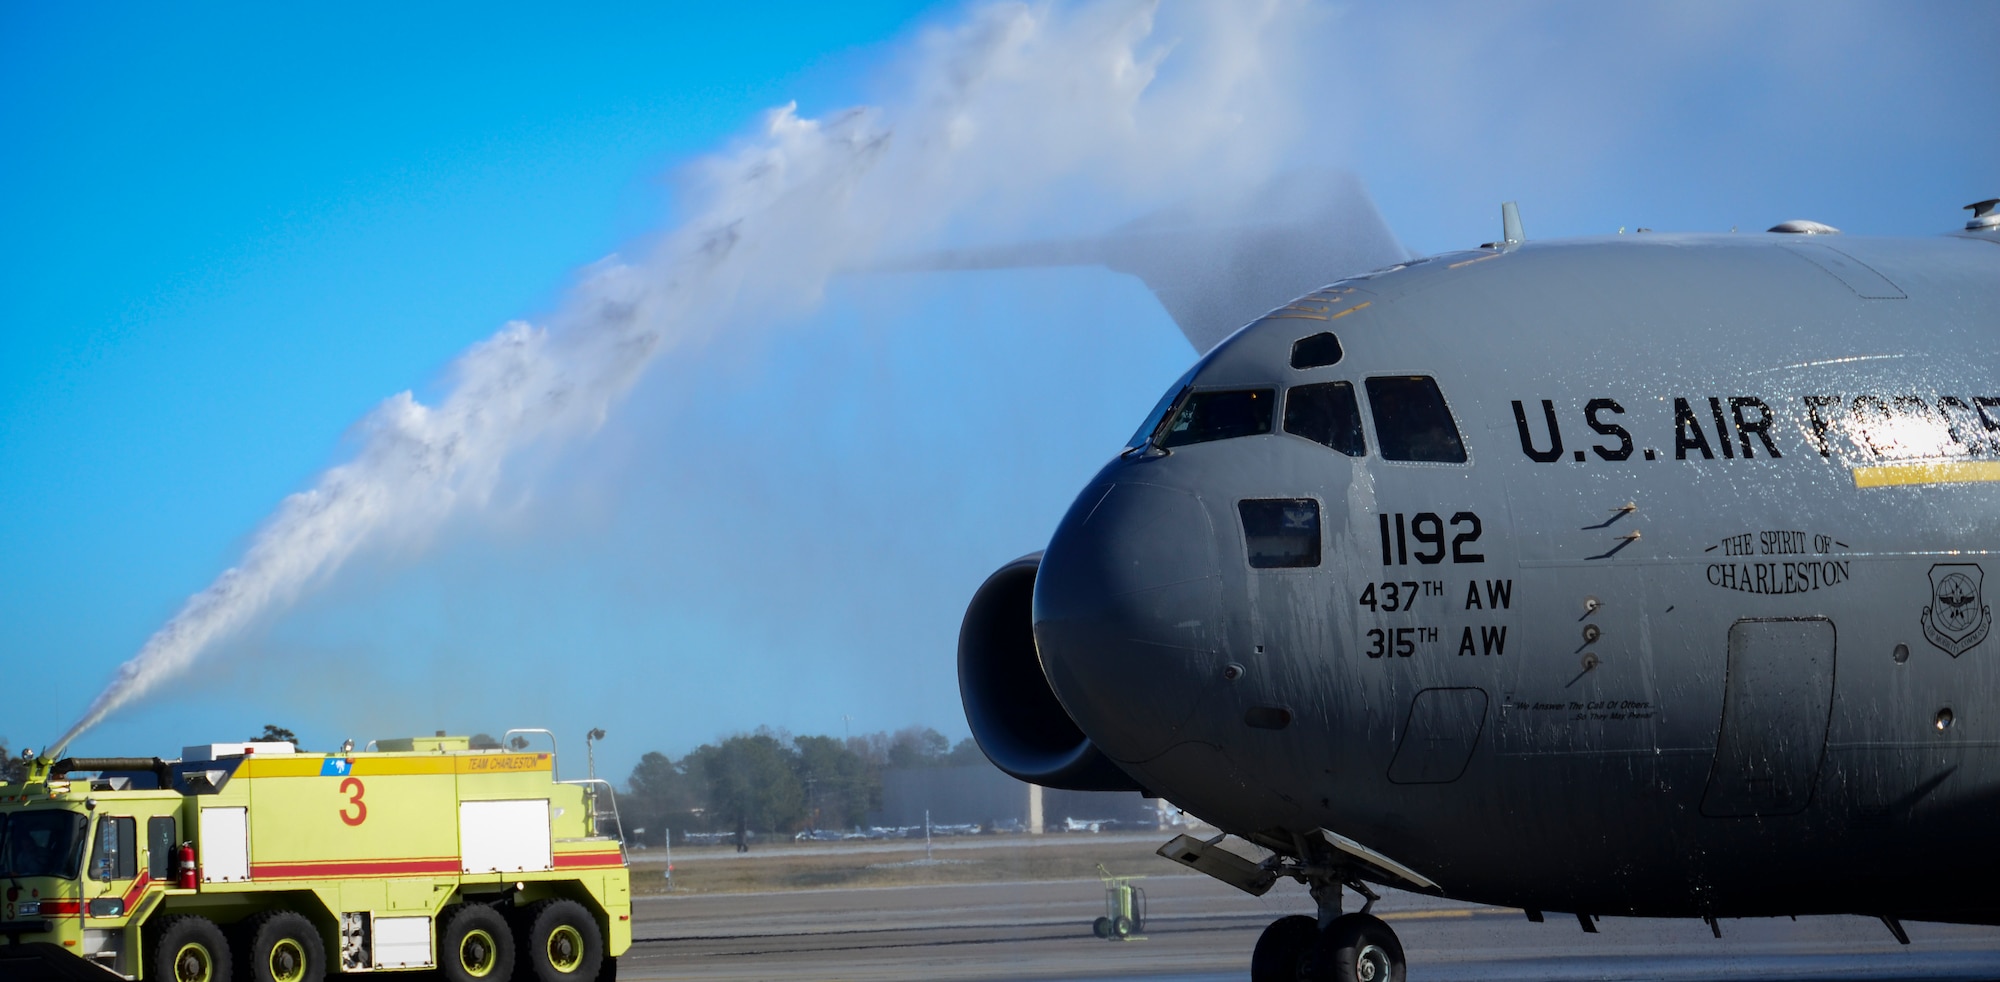 C-17 Globemaster III, Aircraft 9192, is doused with water by fire trucks during a ceremony December 18, 2013 at Joint Base Charleston – Air Base, S.C. The aircraft, nicknamed the “Spirit of Charleston” was the first C-17 in the U.S. Air Force’s inventory and has flown missions throughout the world for more than two decades. Those missions have totaled more than 20,000 flight hours. (U.S. Air Force photo/Staff Sgt. Anthony Hyatt)